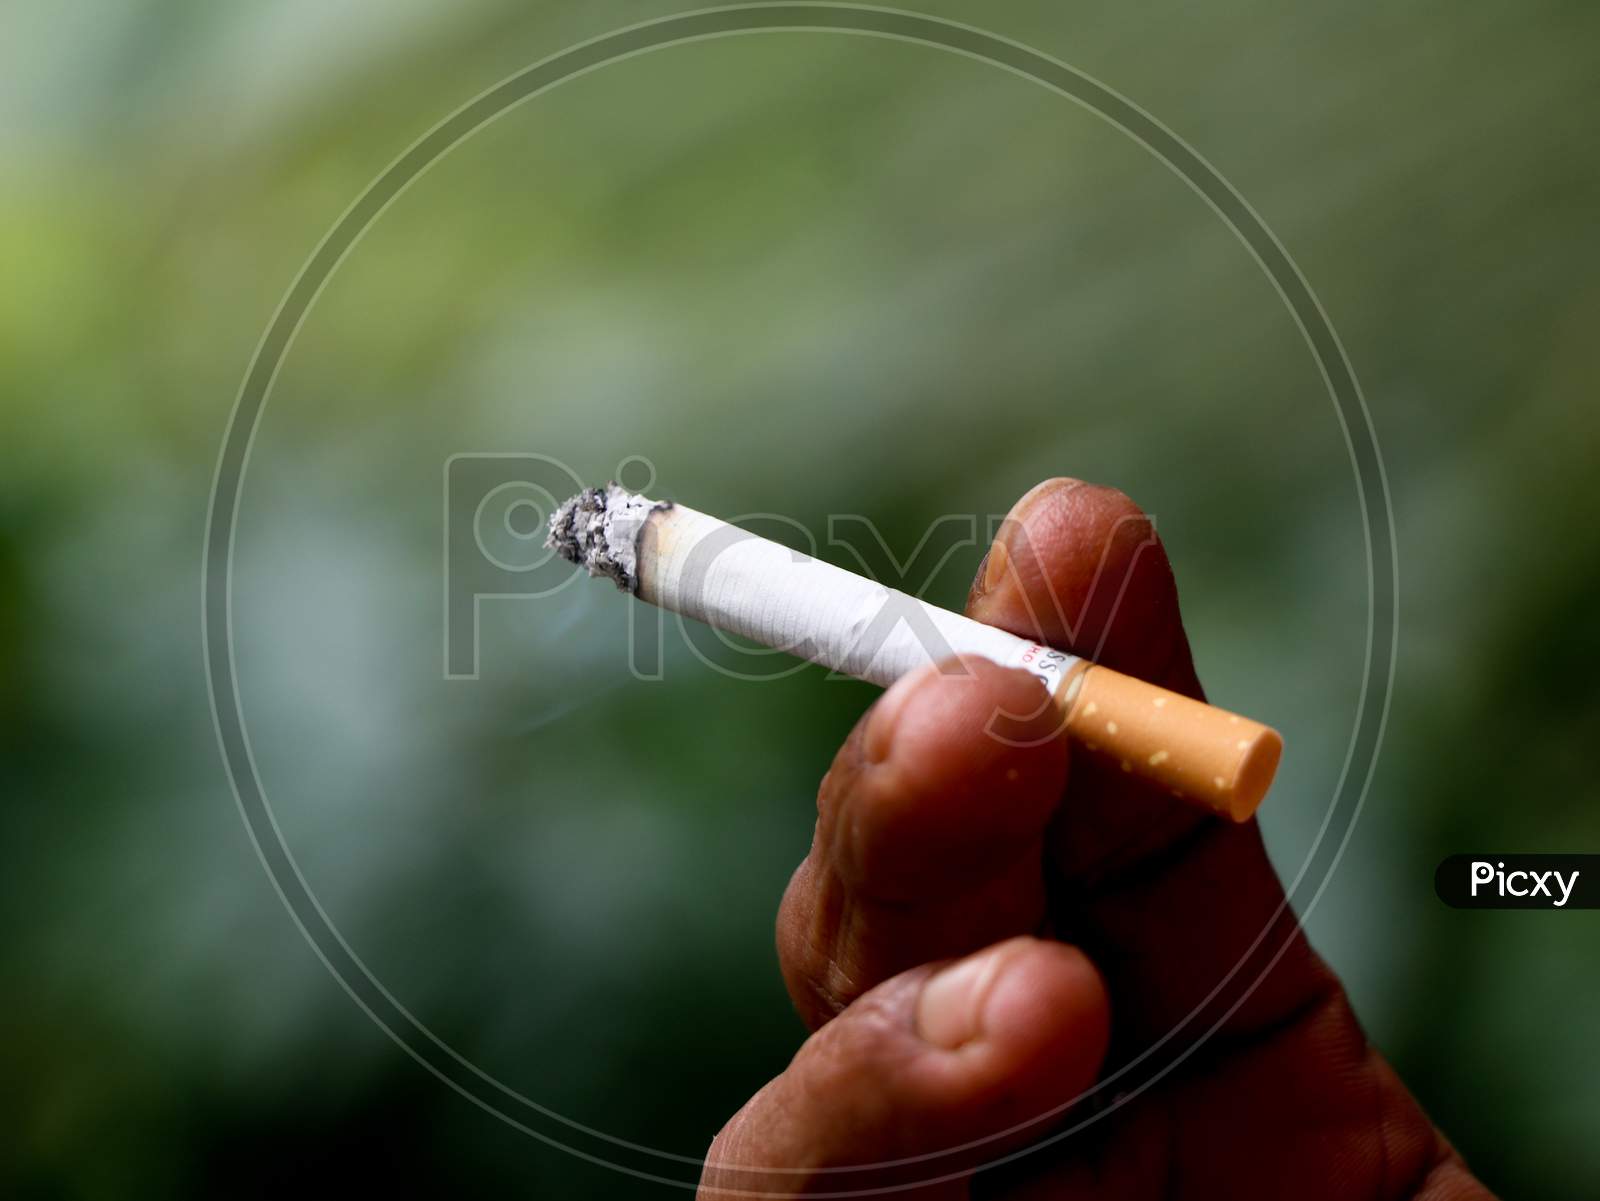 Male Fingers Holding A Burning Cigarette